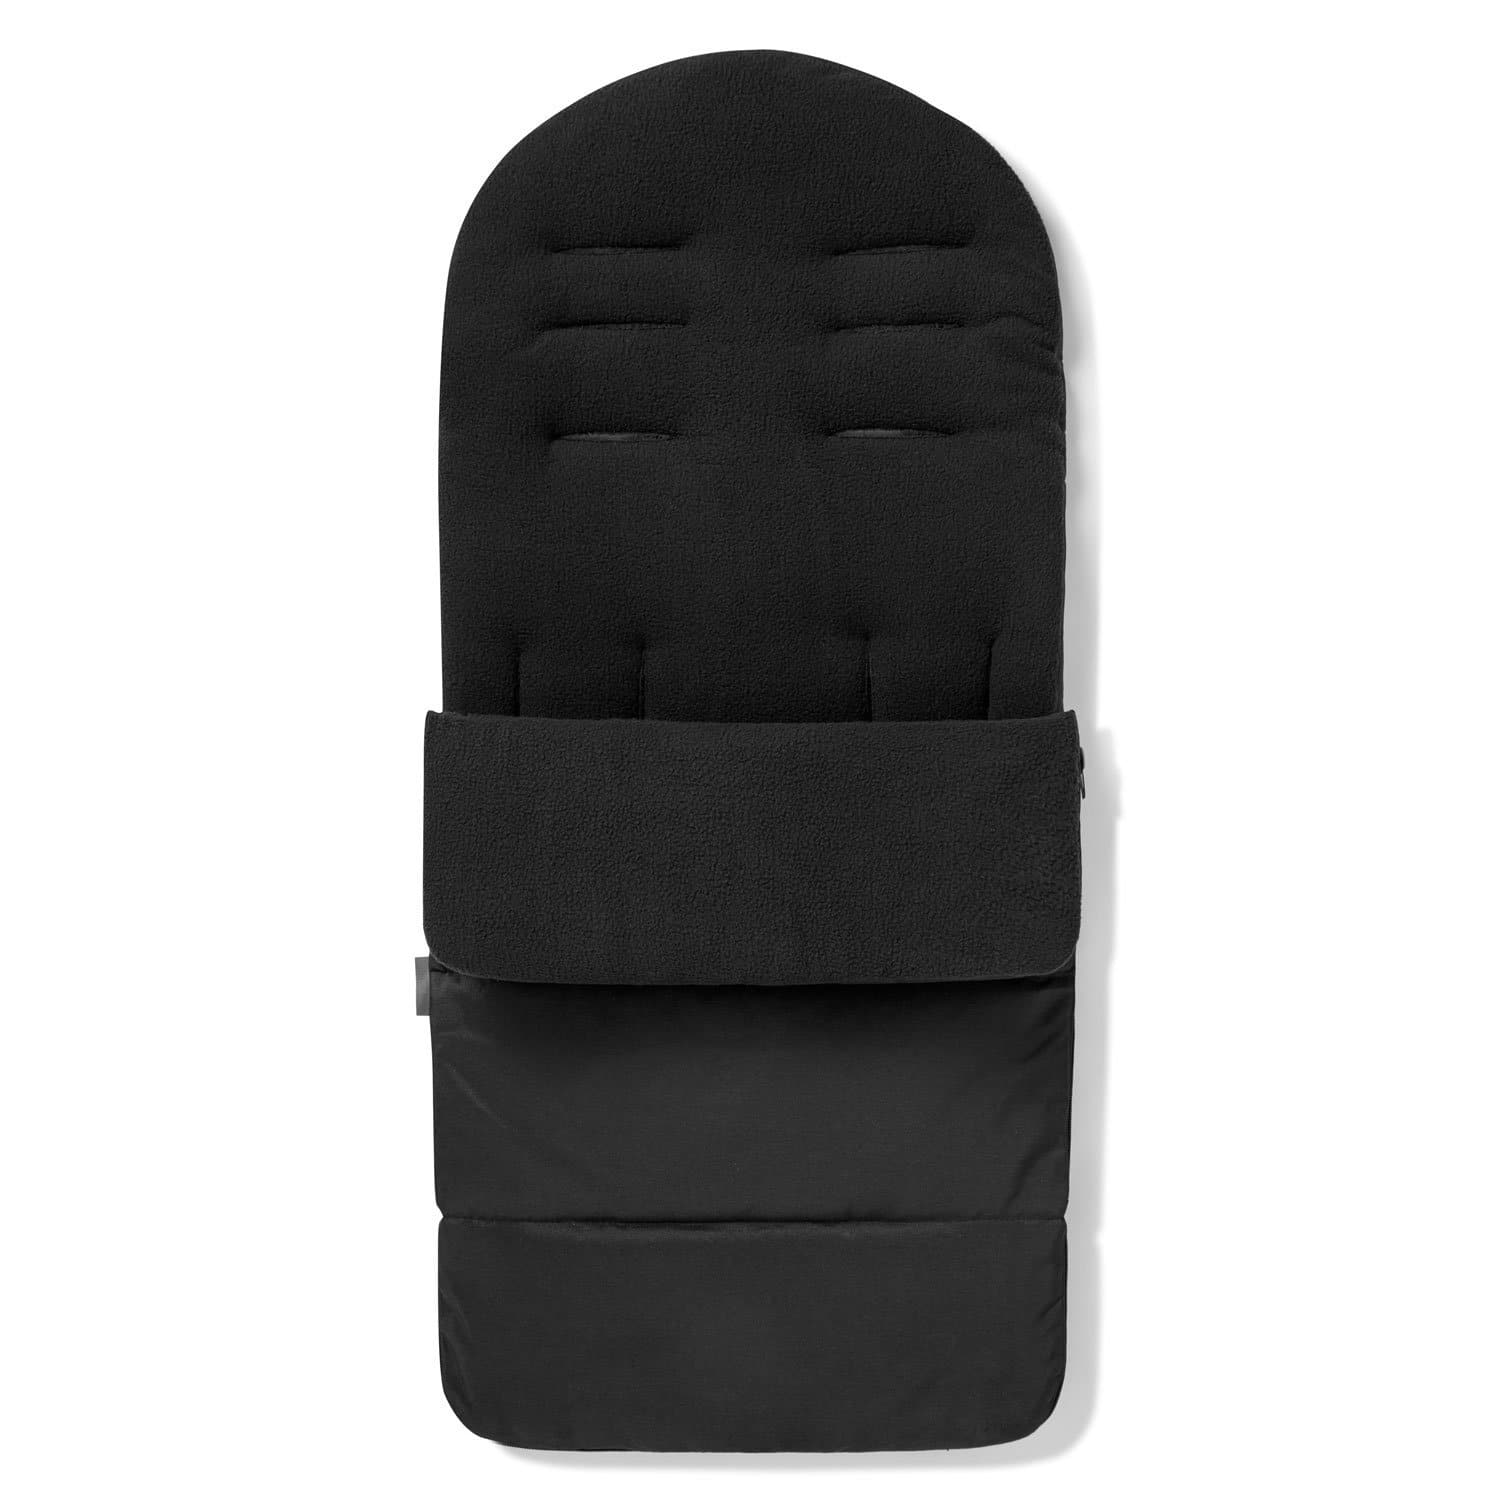 Premium Footmuff / Cosy Toes Compatible with XTS - Black Jack / Fits All Models | For Your Little One